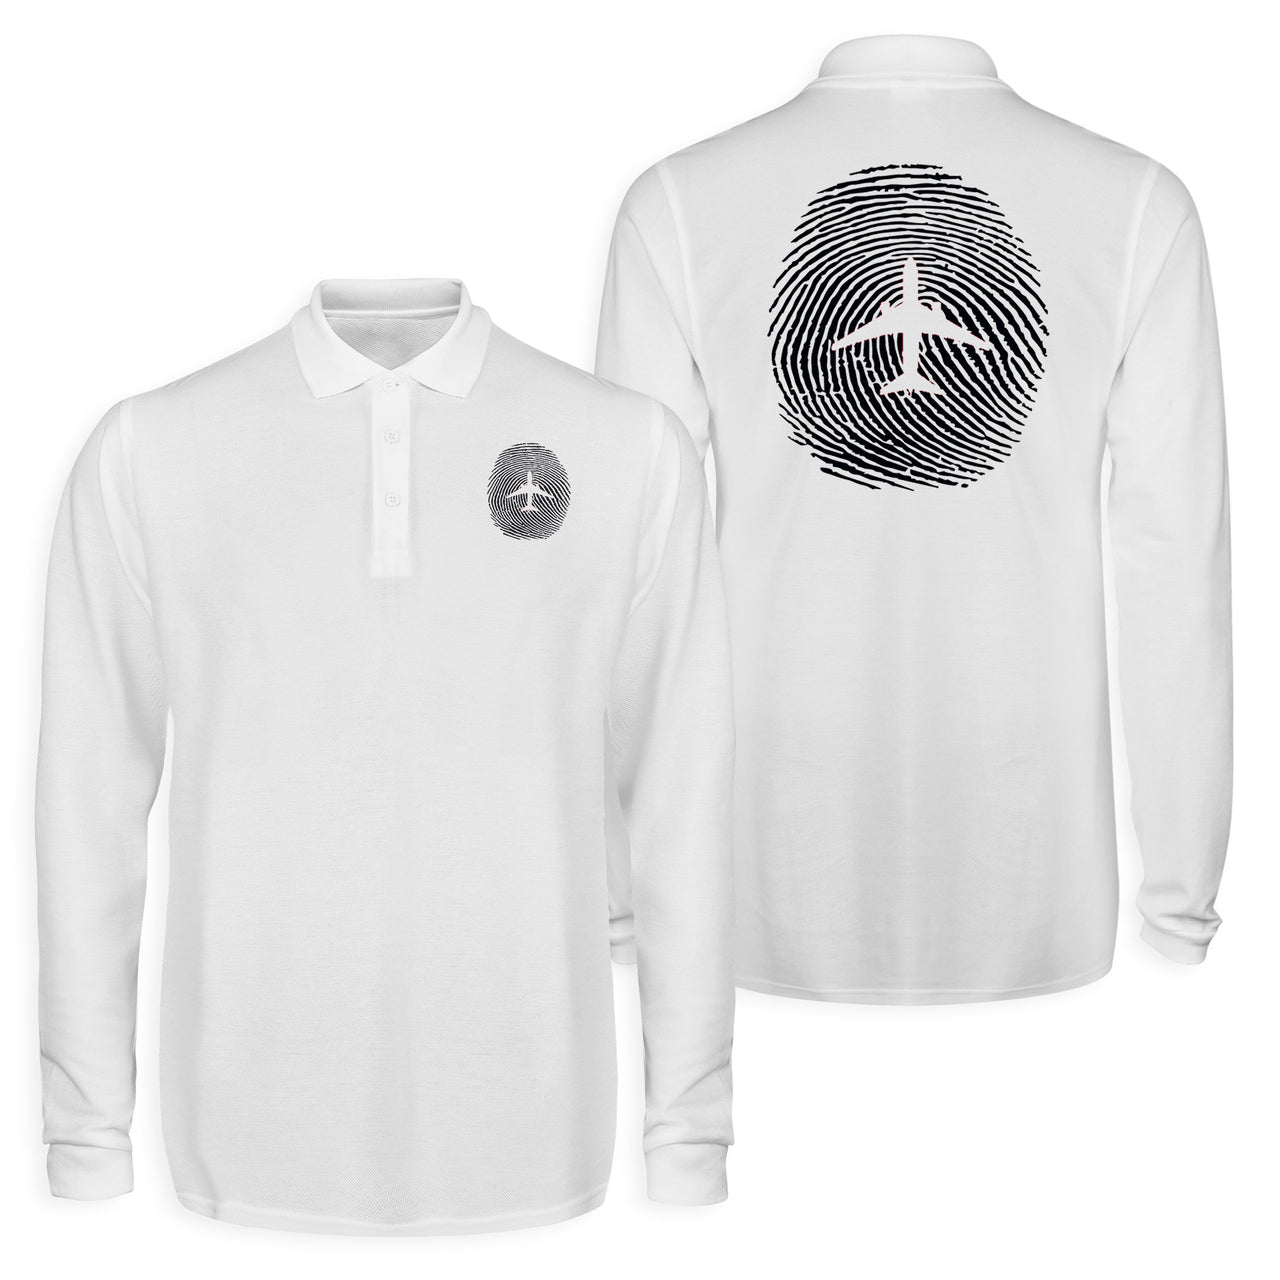 Aviation Finger Print Designed Long Sleeve Polo T-Shirts (Double-Side)